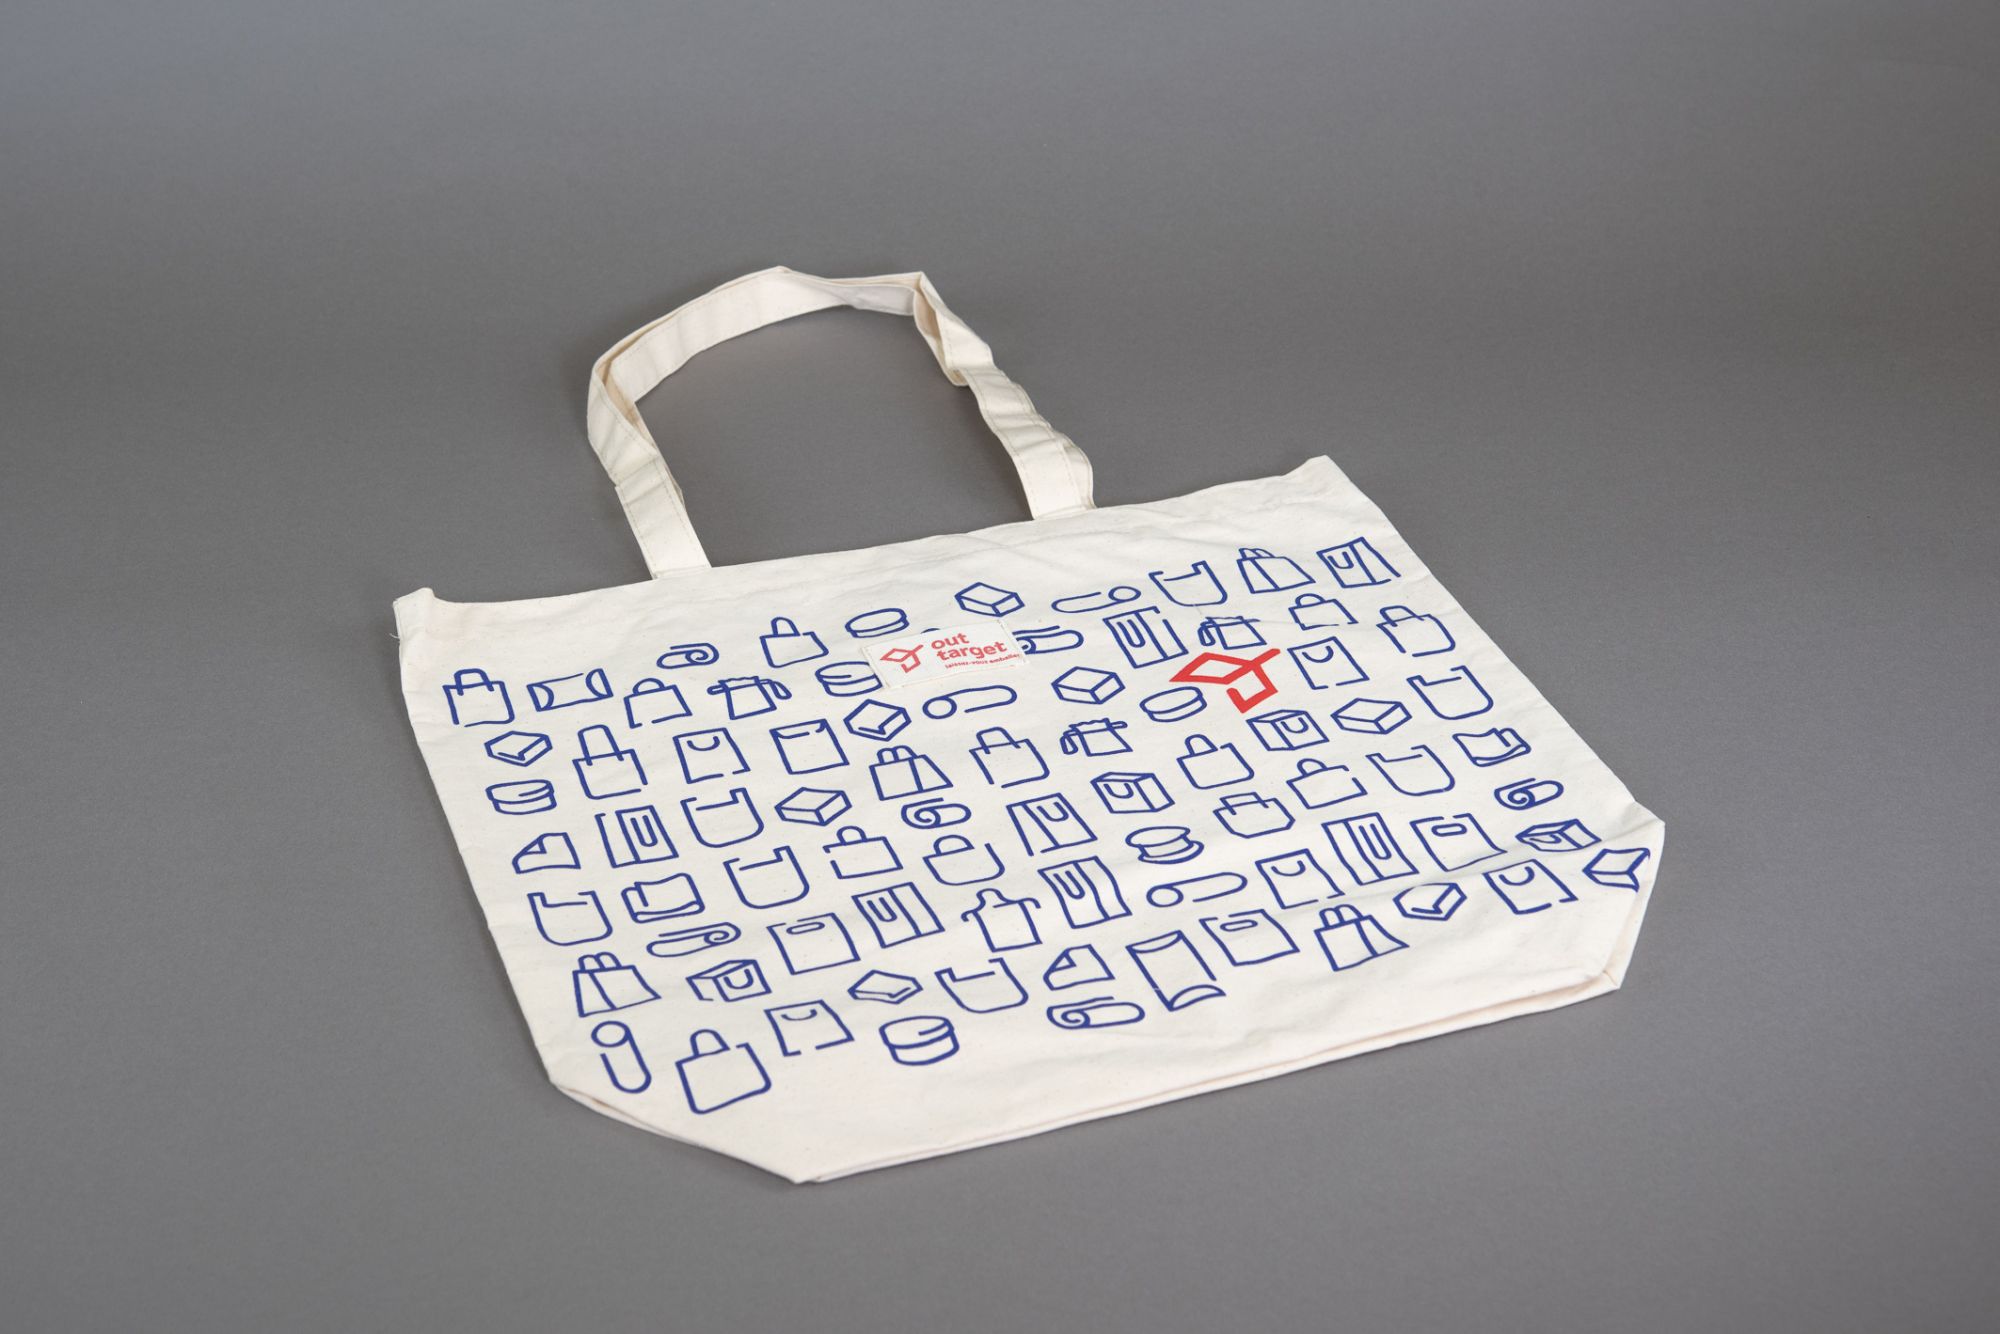 page=https://www.outtarget.com/Sac-coton-Tote-Bag-outtarget-art-42.html